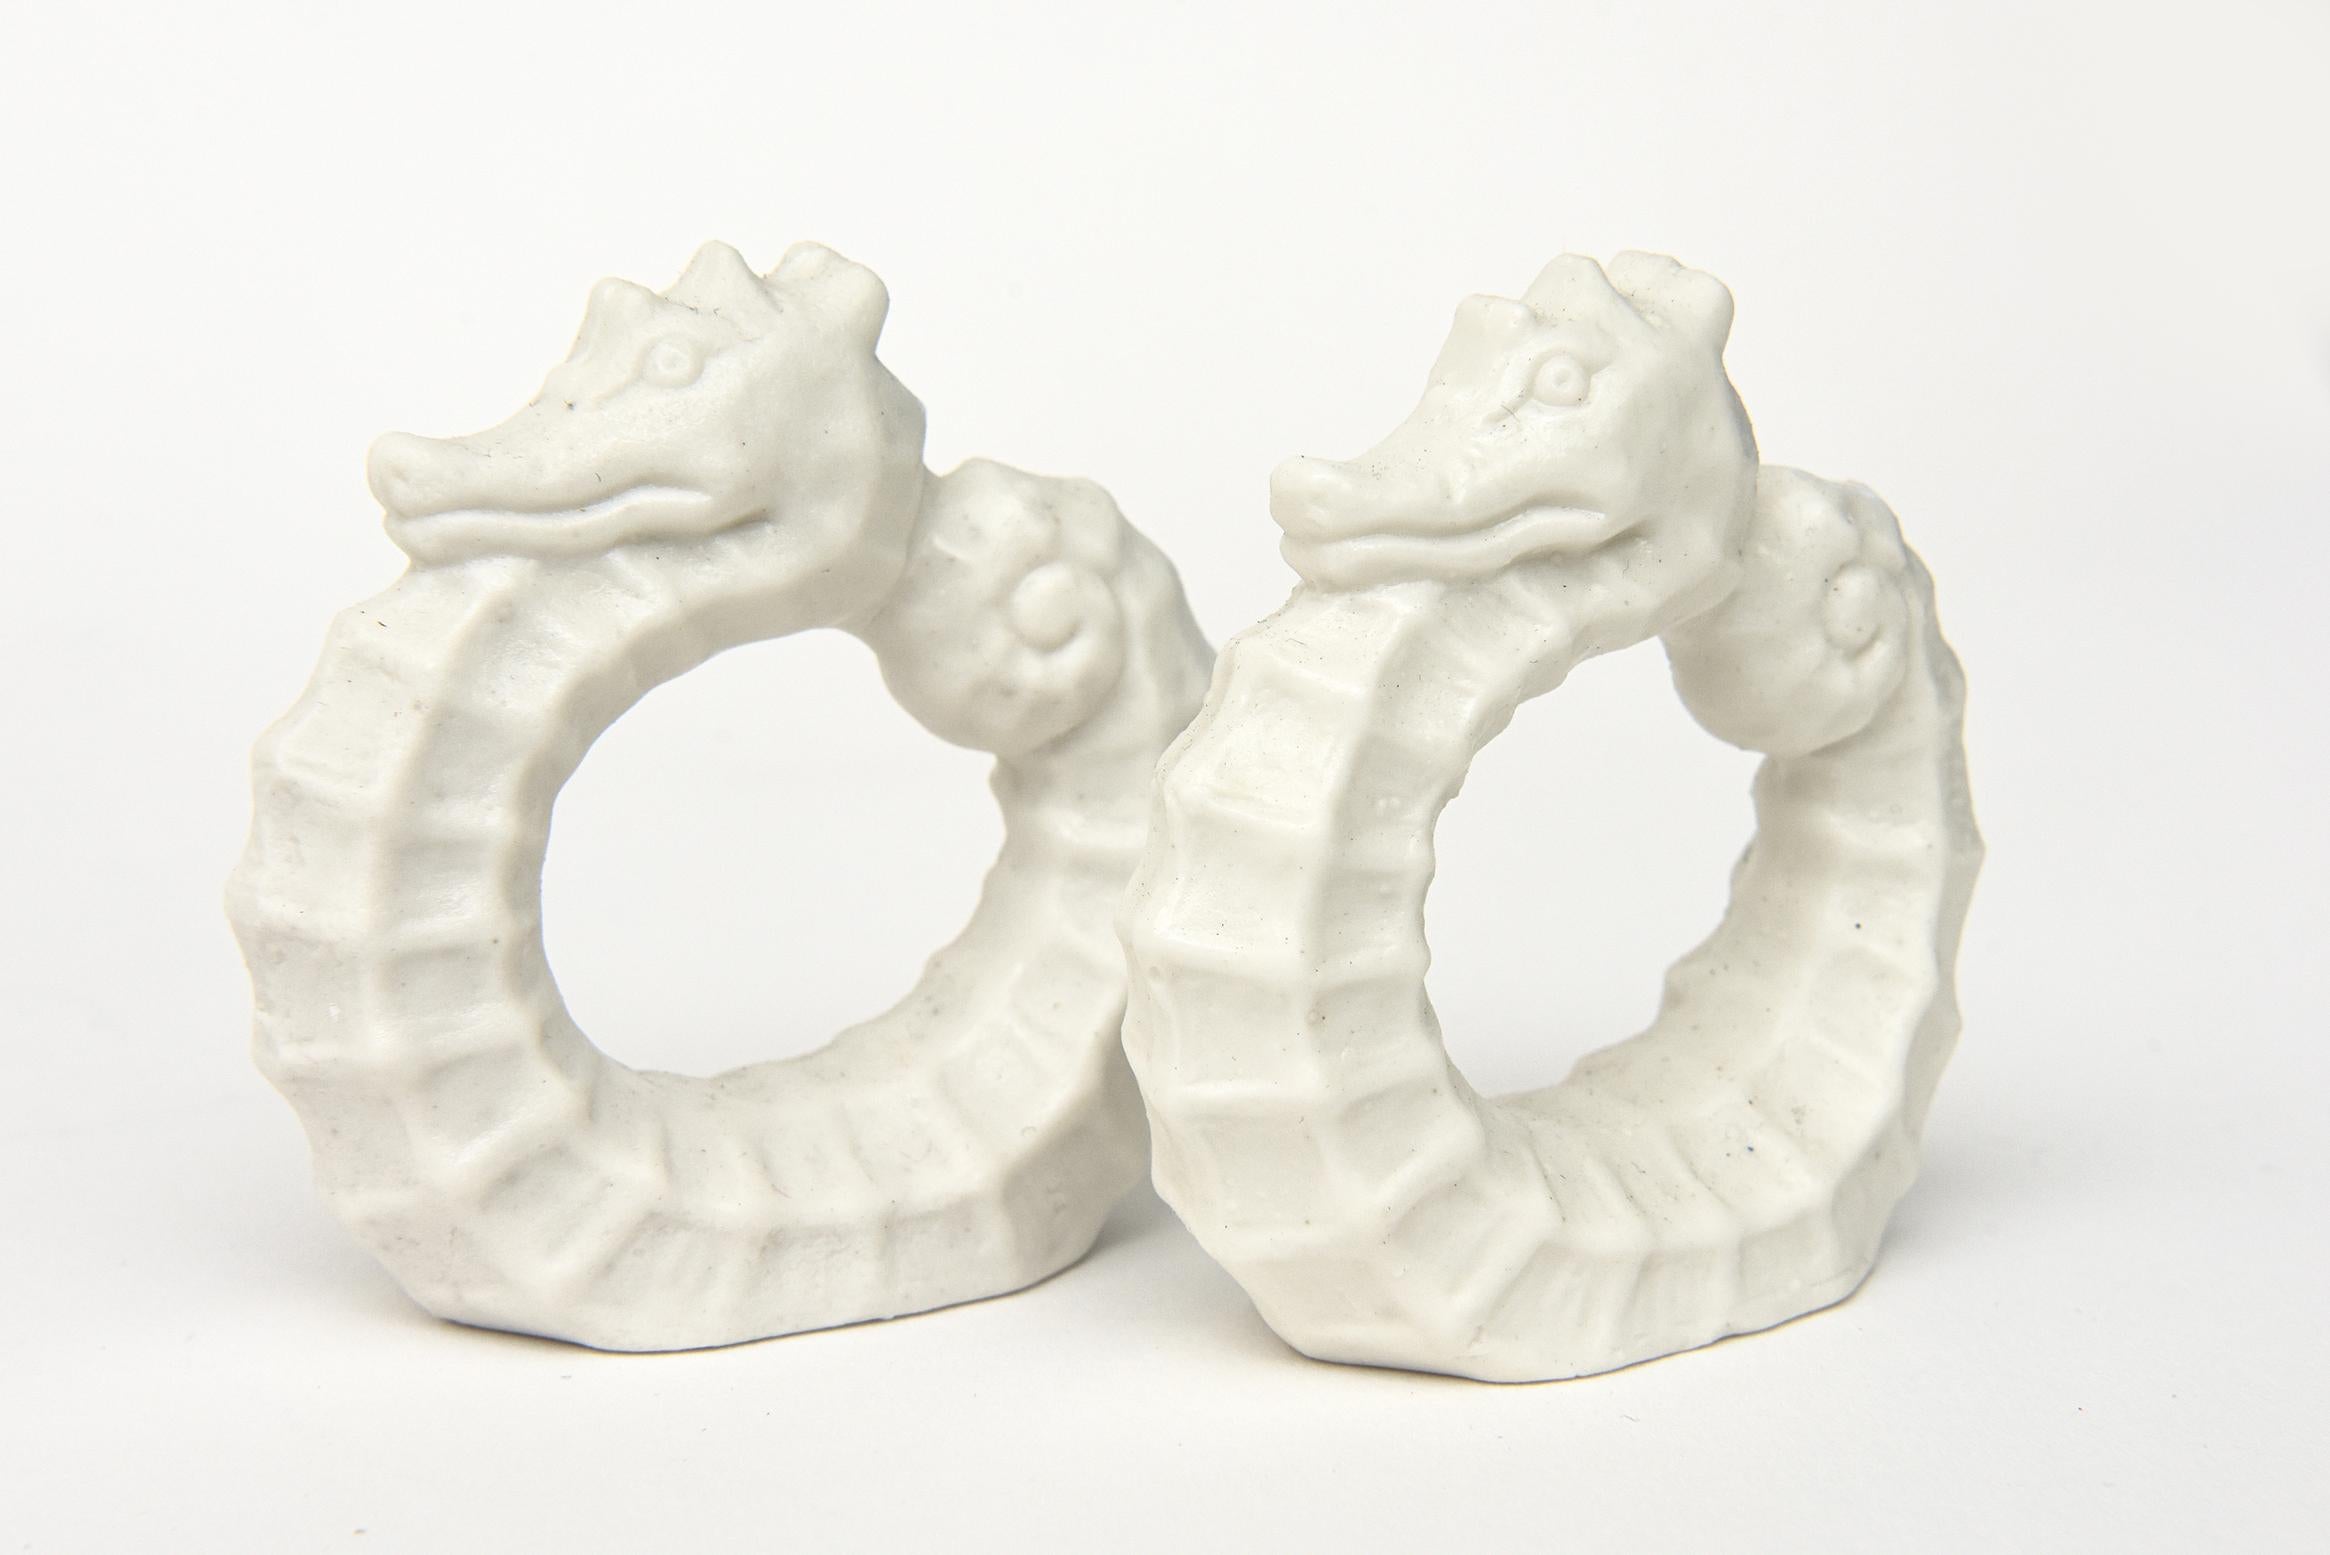 Vintage White Bisque Matt Porcelain Sea Horse Napkin Rings Set of 6 In Good Condition For Sale In North Miami, FL